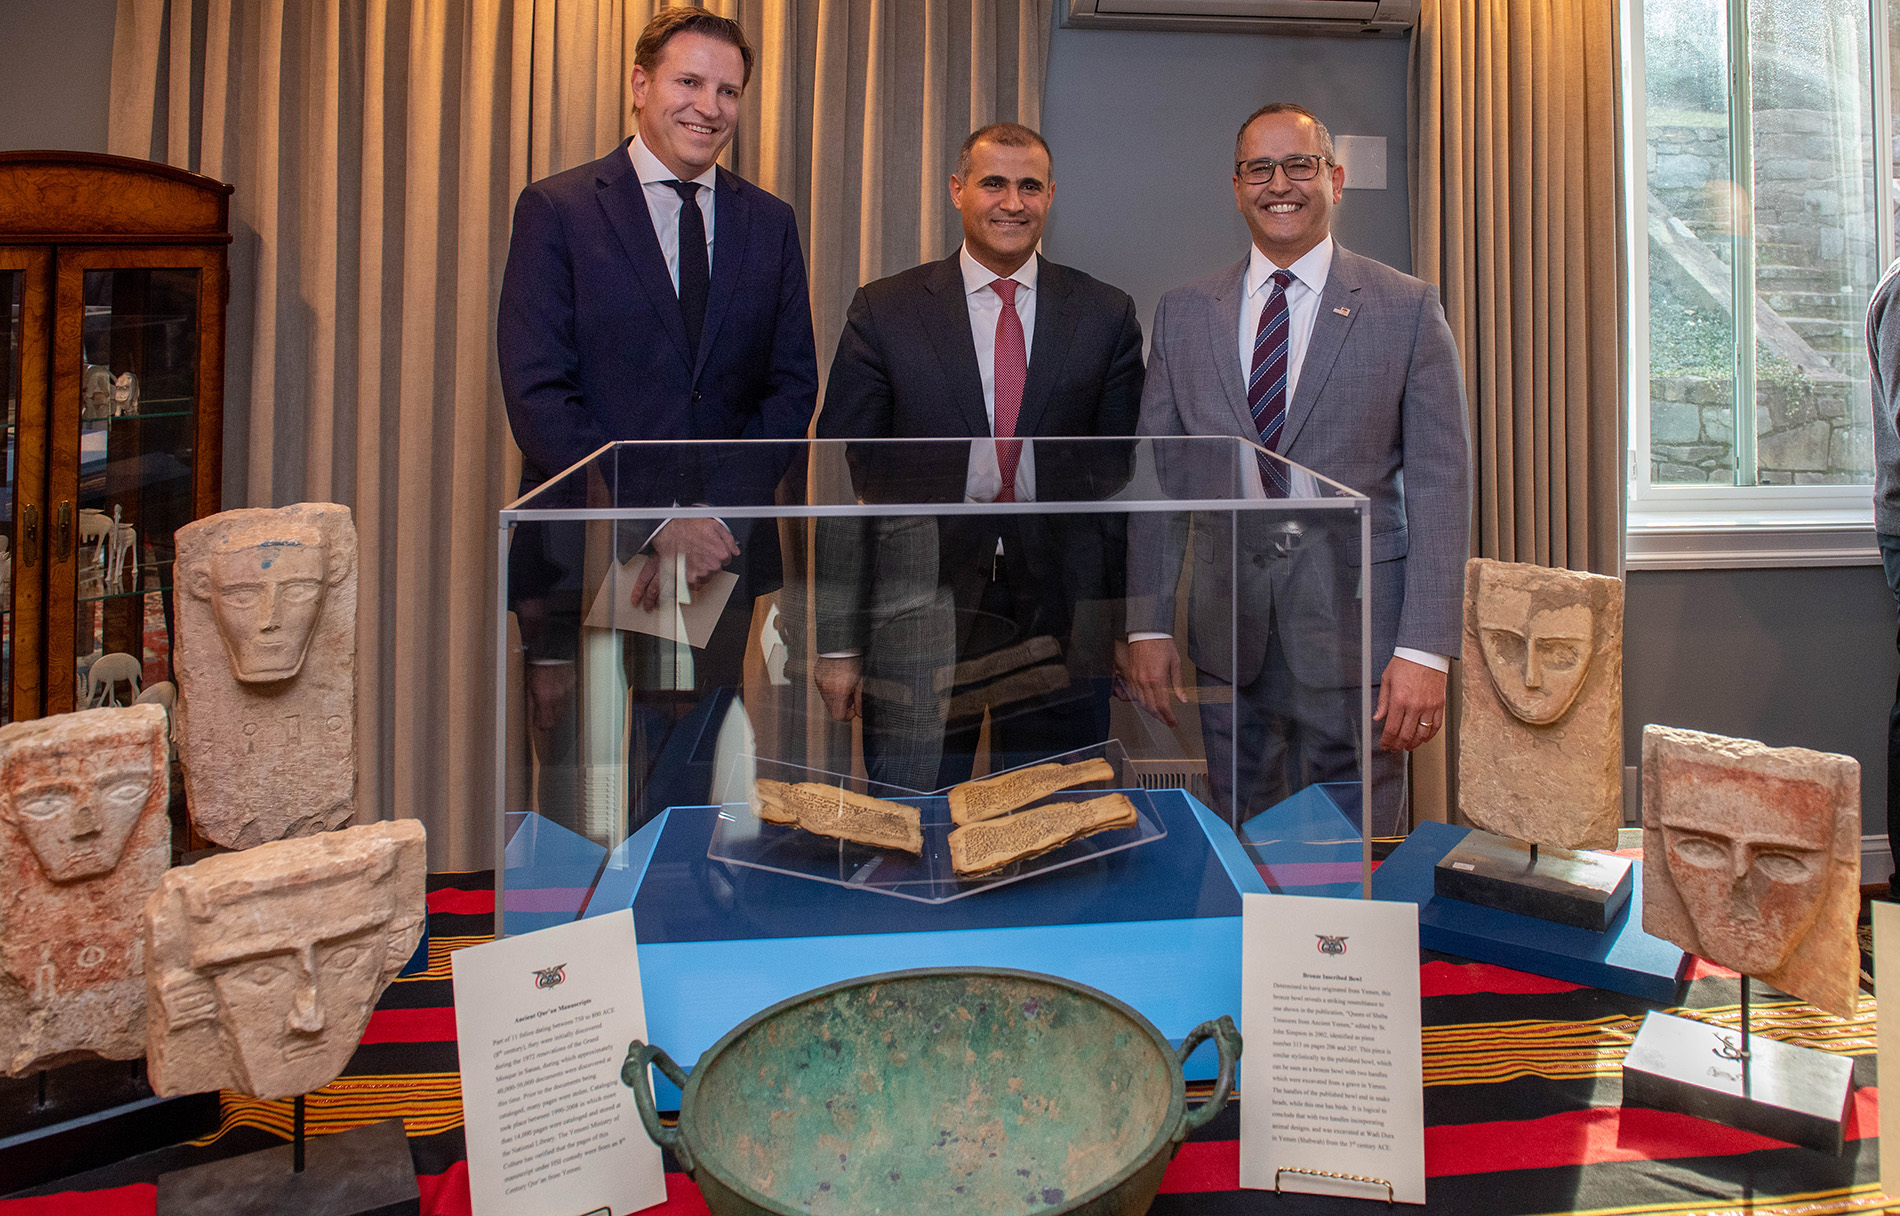 (Left to Right) Professor Mark Vlasic, Georgetown University ; Ambassador Mohammed Al-Hadhrami, Embassy of the Republic of Yemen to the USA ; Steve Francis, Acting Executive Associate Director, HSI